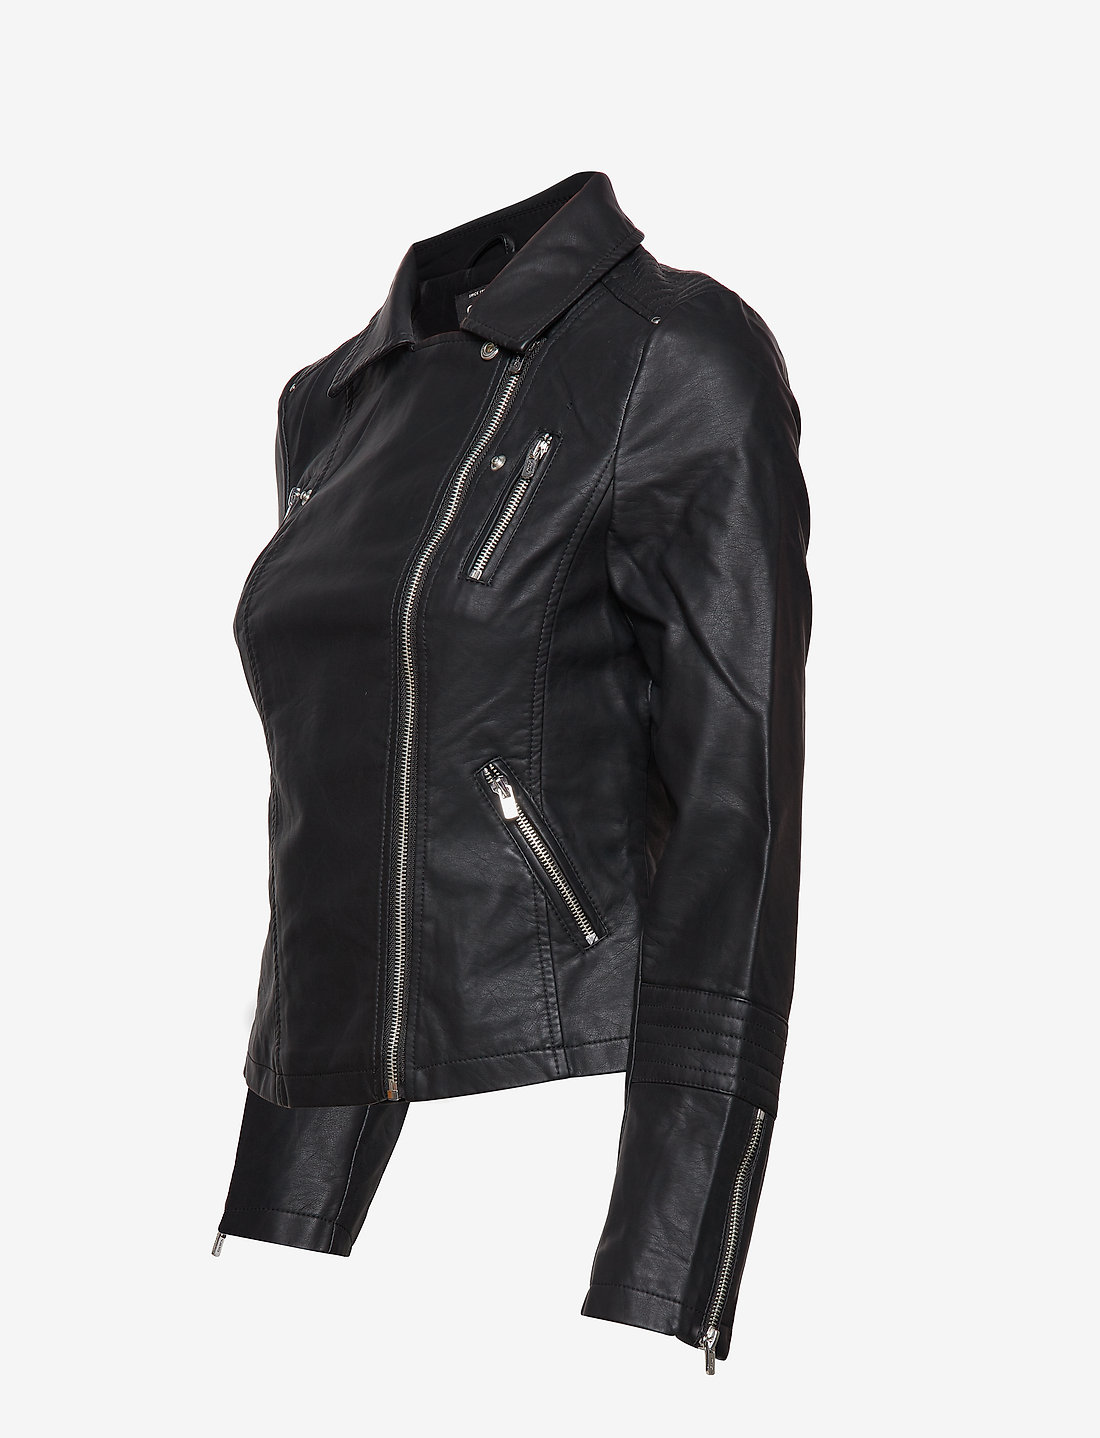 ONLY Onlgemma Faux Leather Biker Otw Noos - 42.49 €. Buy Leather jackets  from ONLY online at Boozt.com. Fast delivery and easy returns